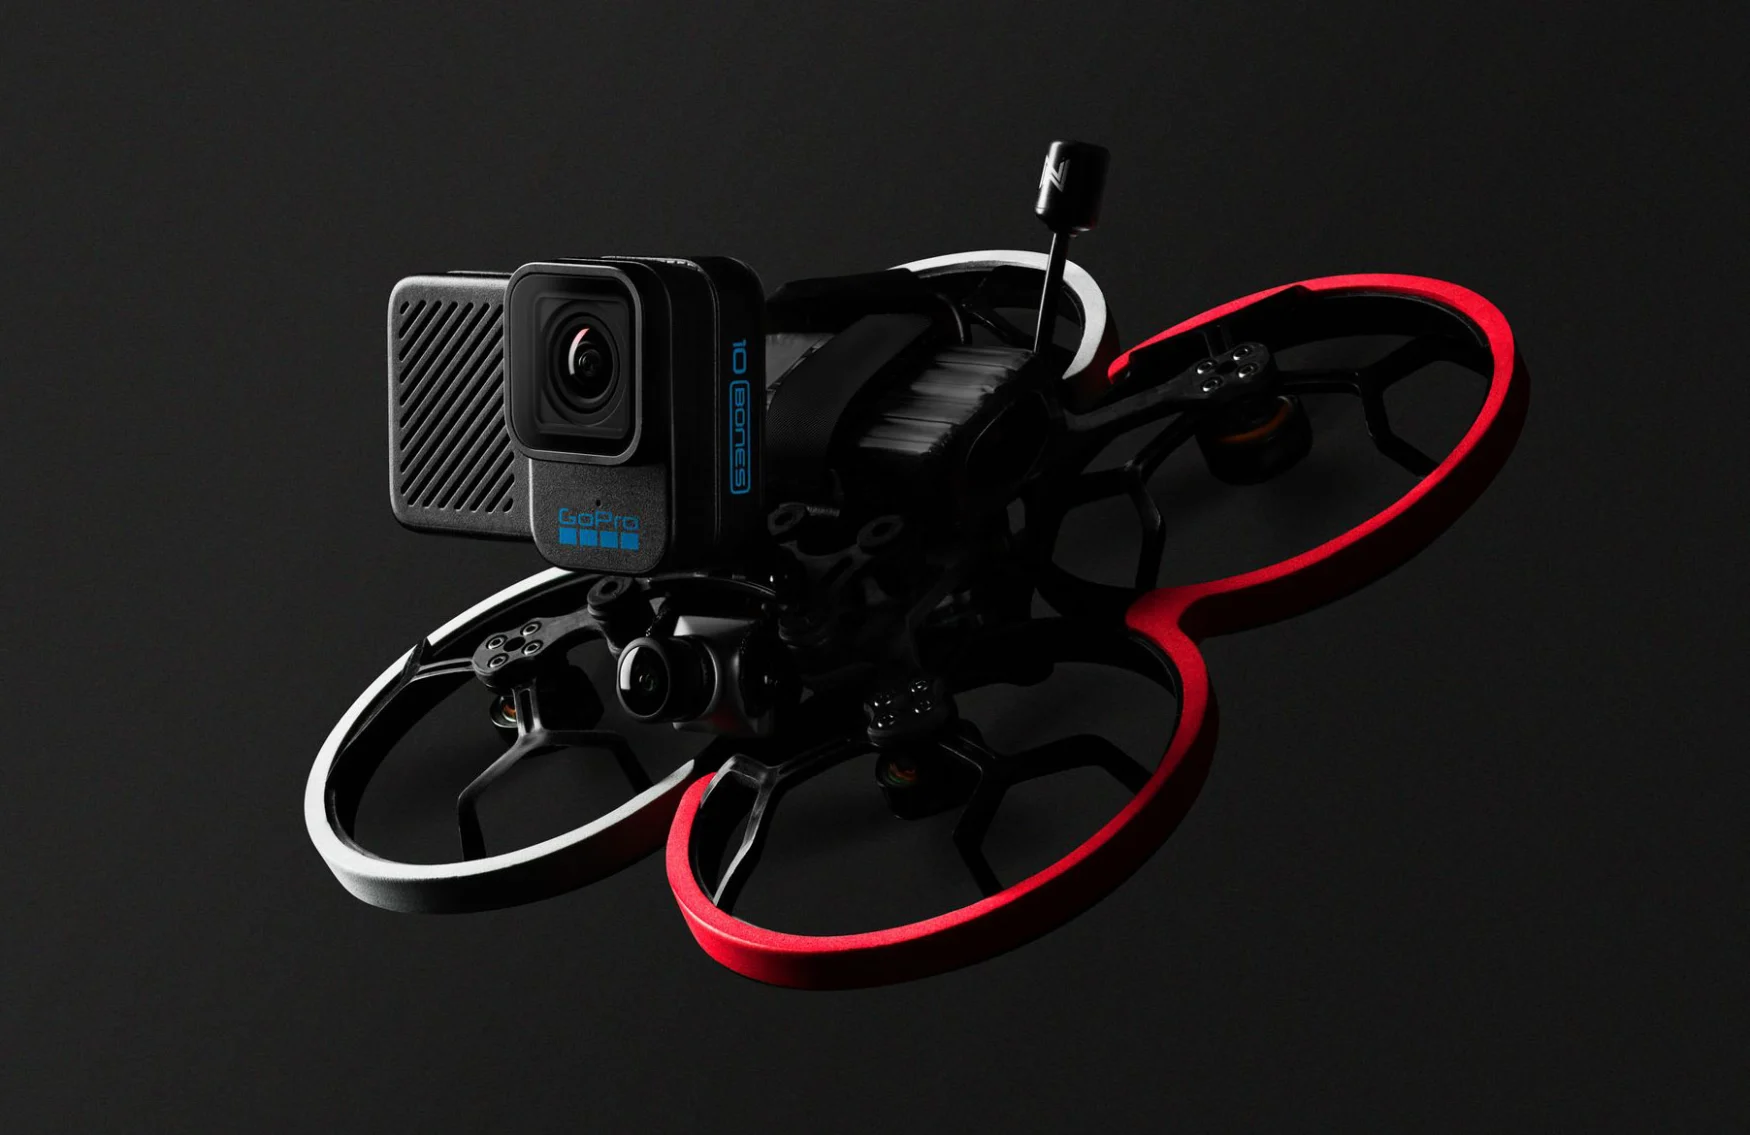 GoPro's 'Bones' is a stripped down Hero 10 Black for FPV drones